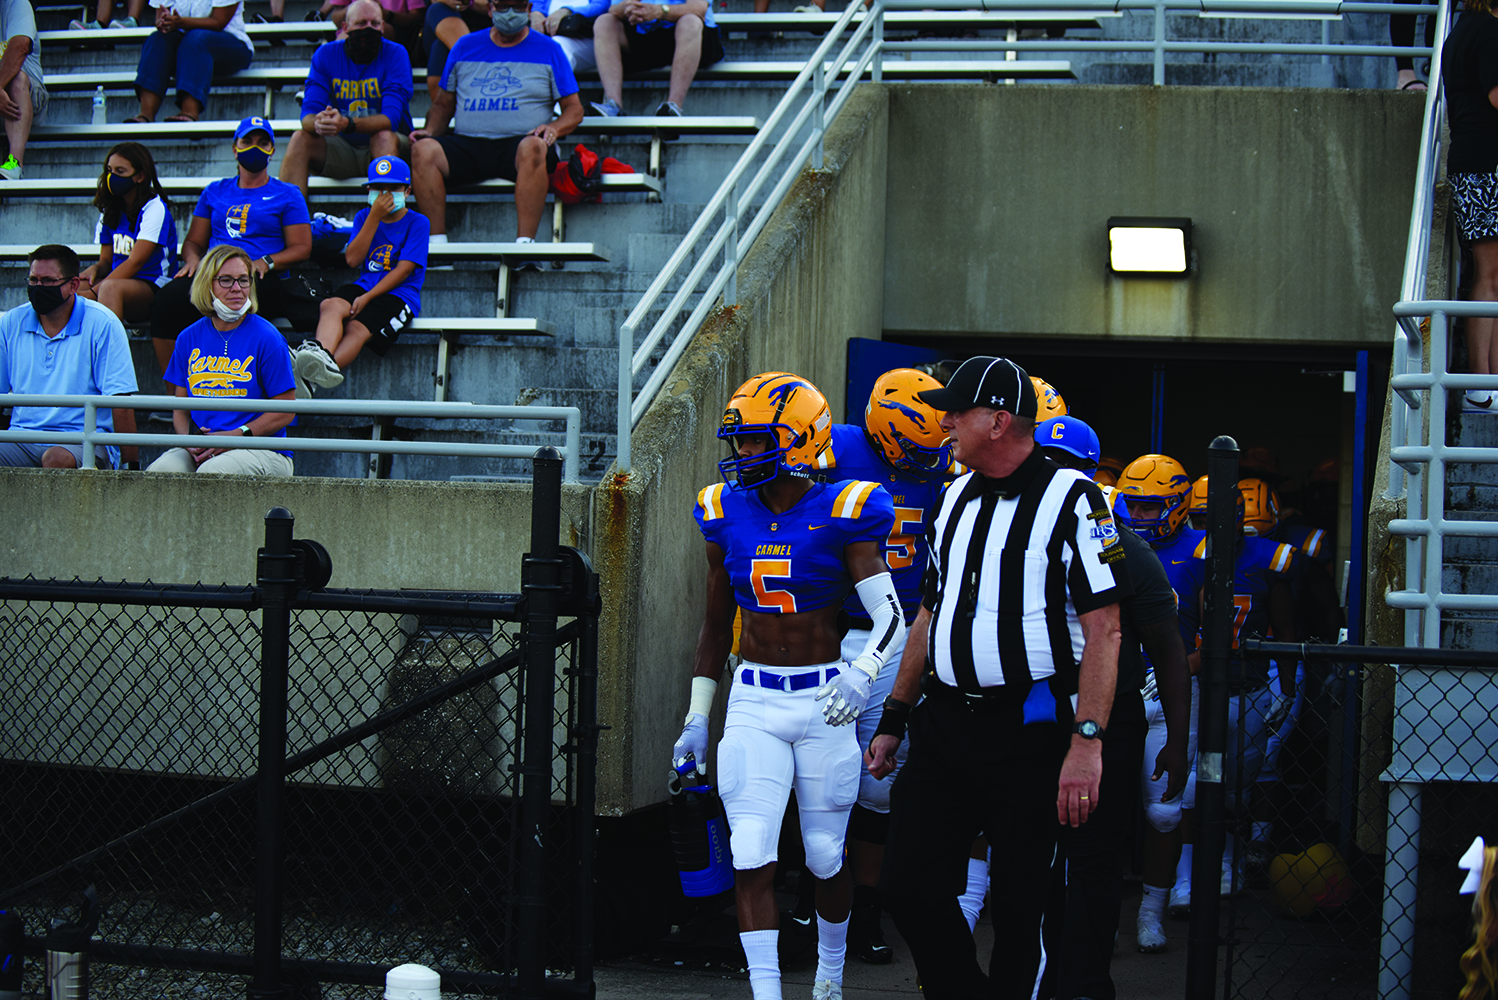 ROLE MODEL: Baron Smith, varsity football player and senior, leads his team out of the locker rooms. Smith said he takes the respondsibility of being a leader and reminding his team to stay distant. Smith said he wears a mask whenever he can to set an example and to lessen the spread of a possible case so that many players can get out on the field.